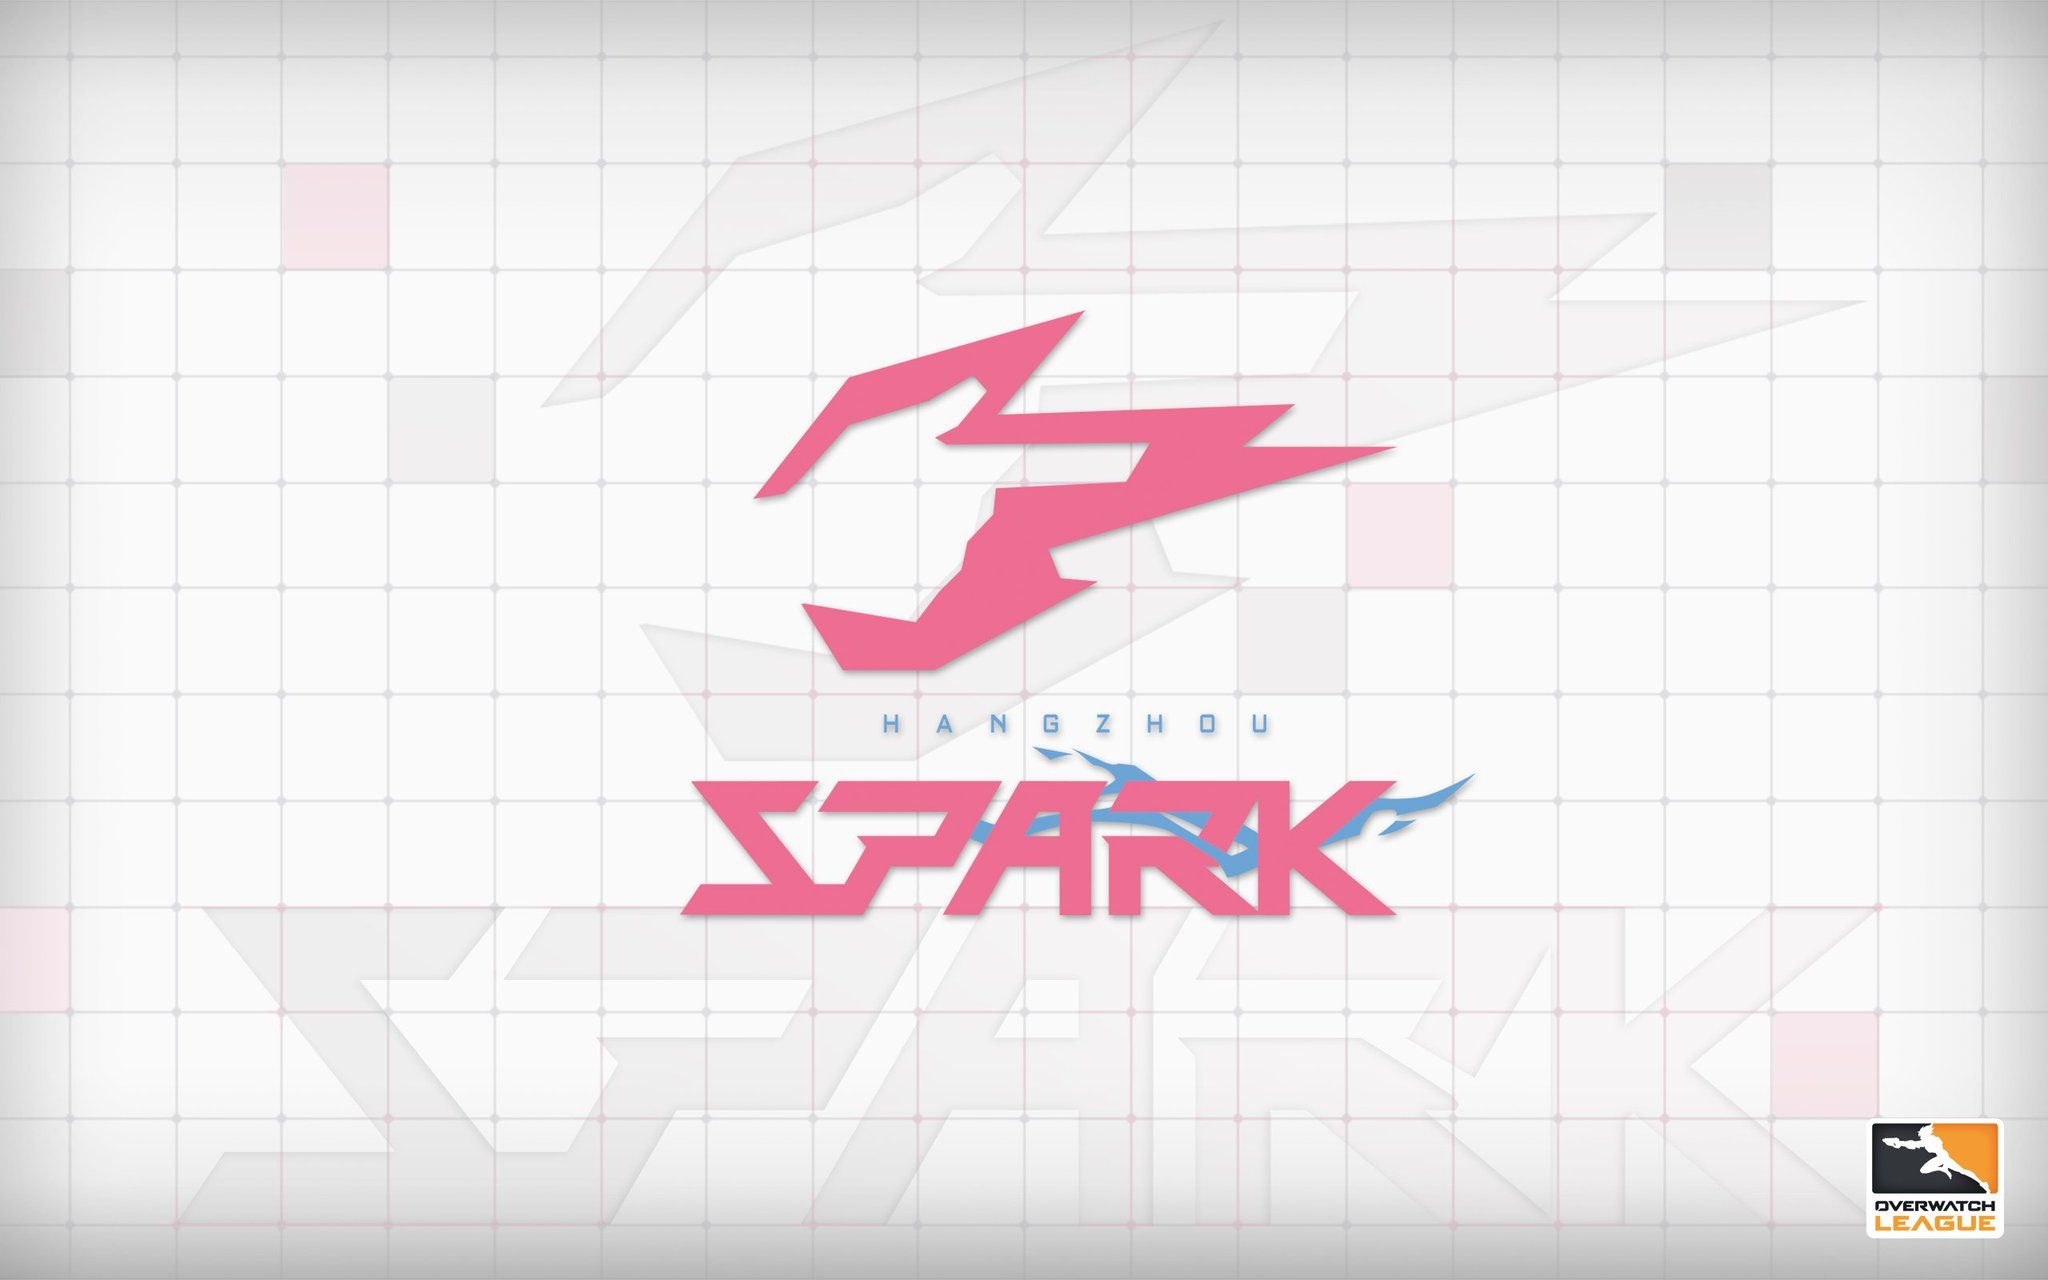 Hangzhou Spark are official